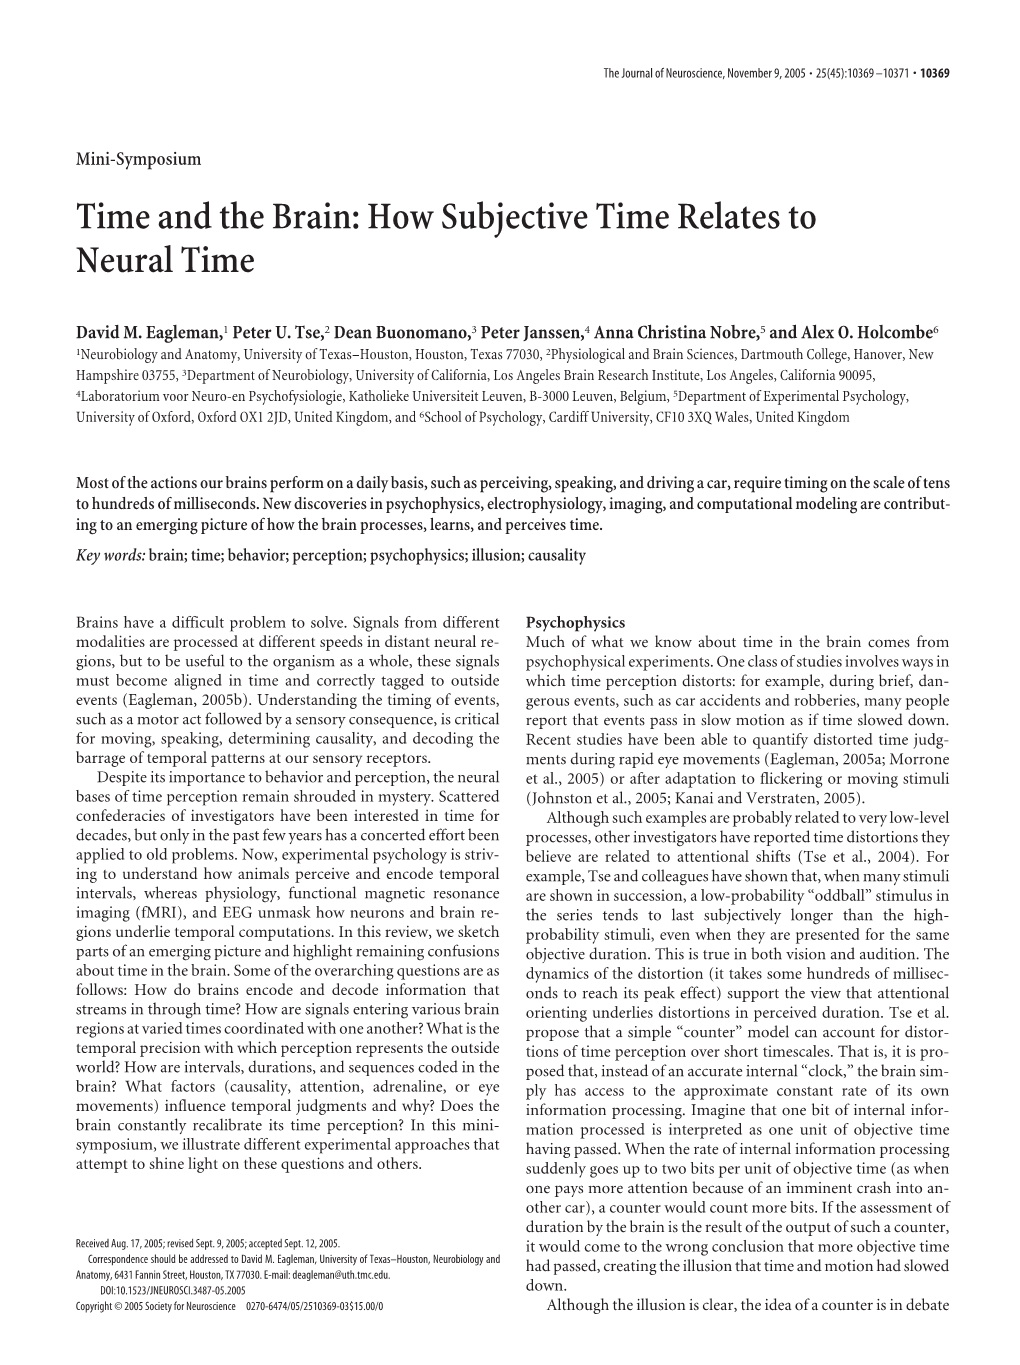 Time and the Brain: How Subjective Time Relates to Neural Time